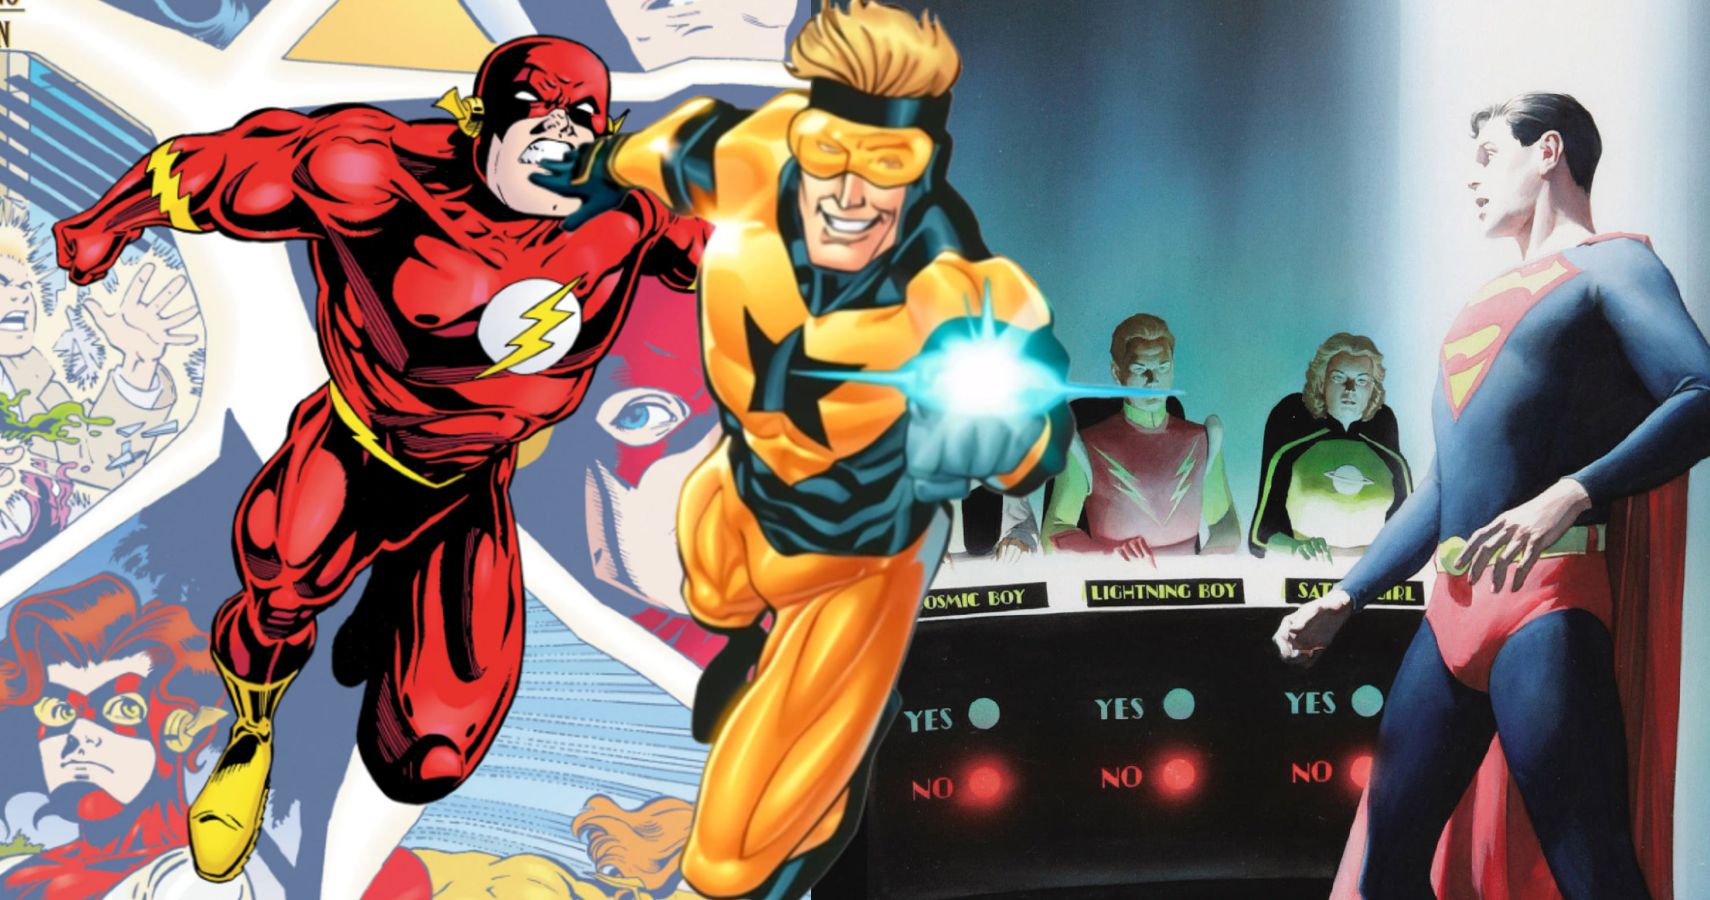 Flash, Booster Gold, Superboy, and the Legion of Super-Heroes